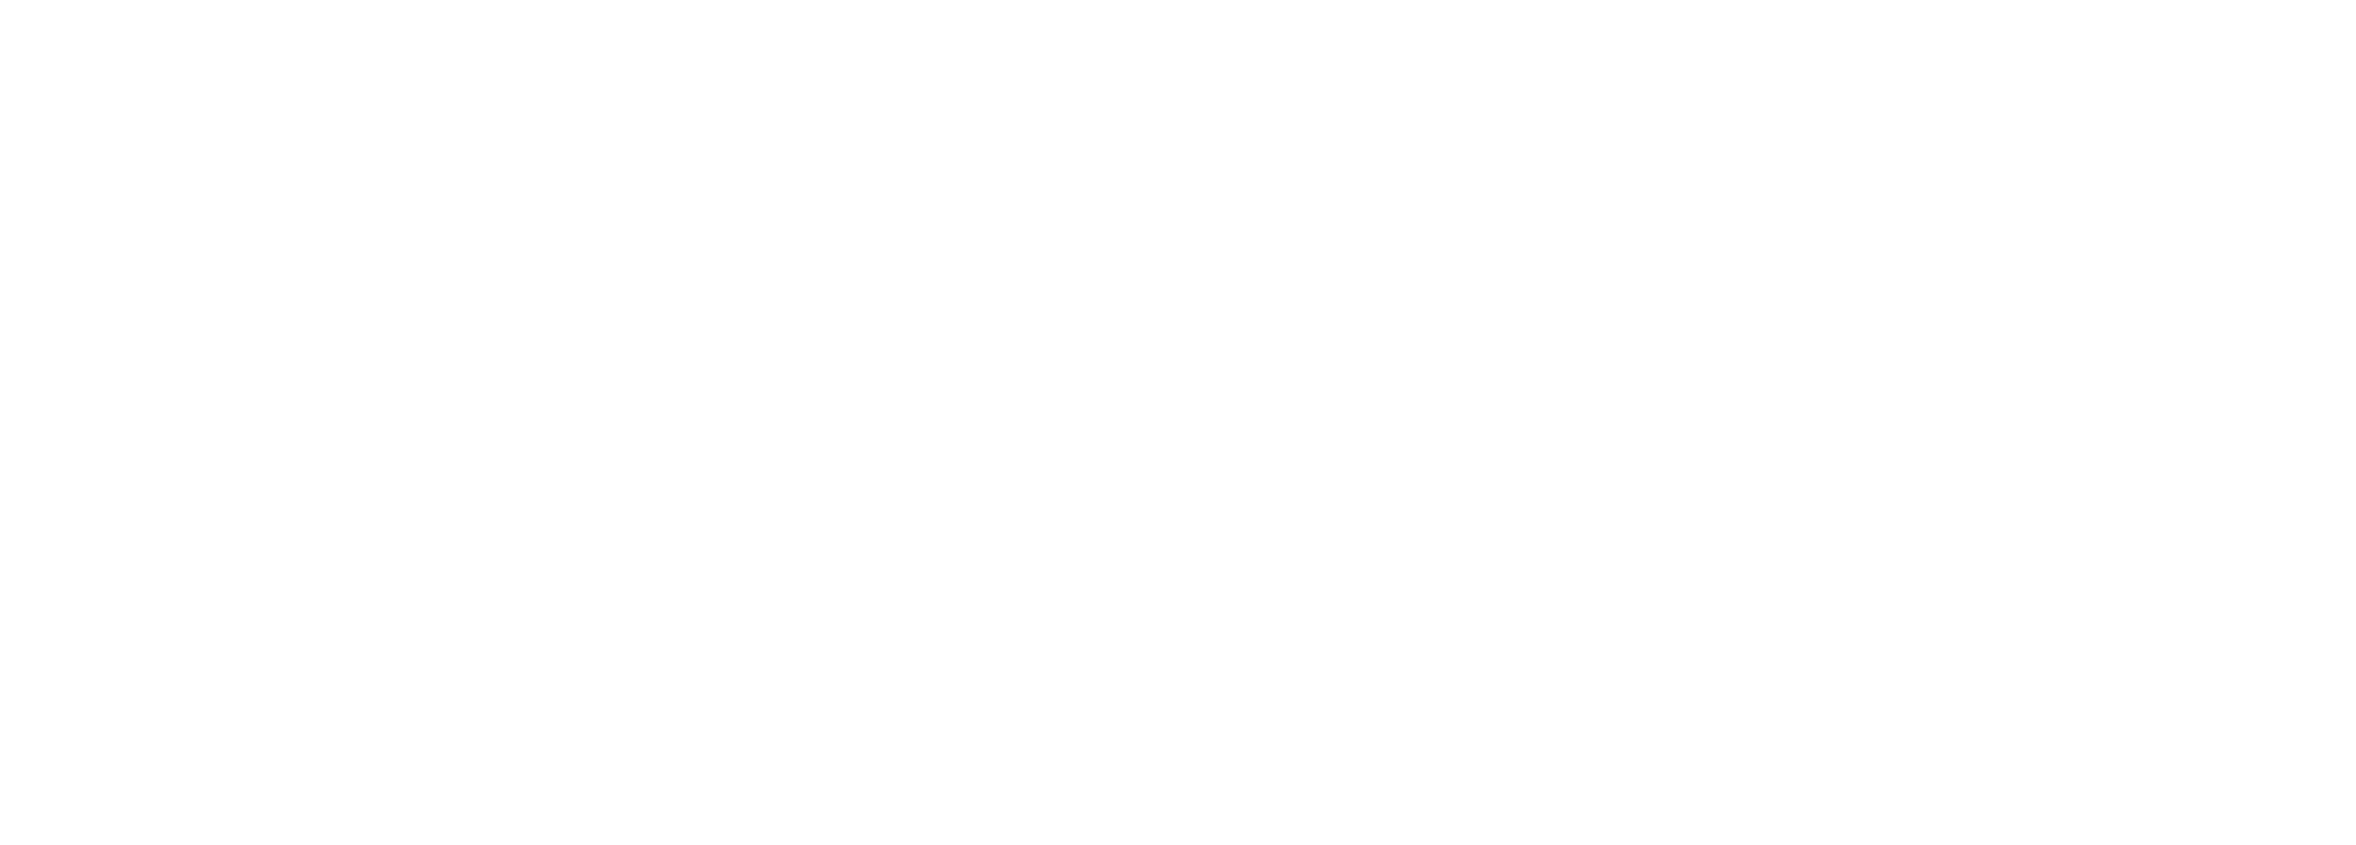 Ecco Logo - ecco solutions ltd | evidenced client centred solutions